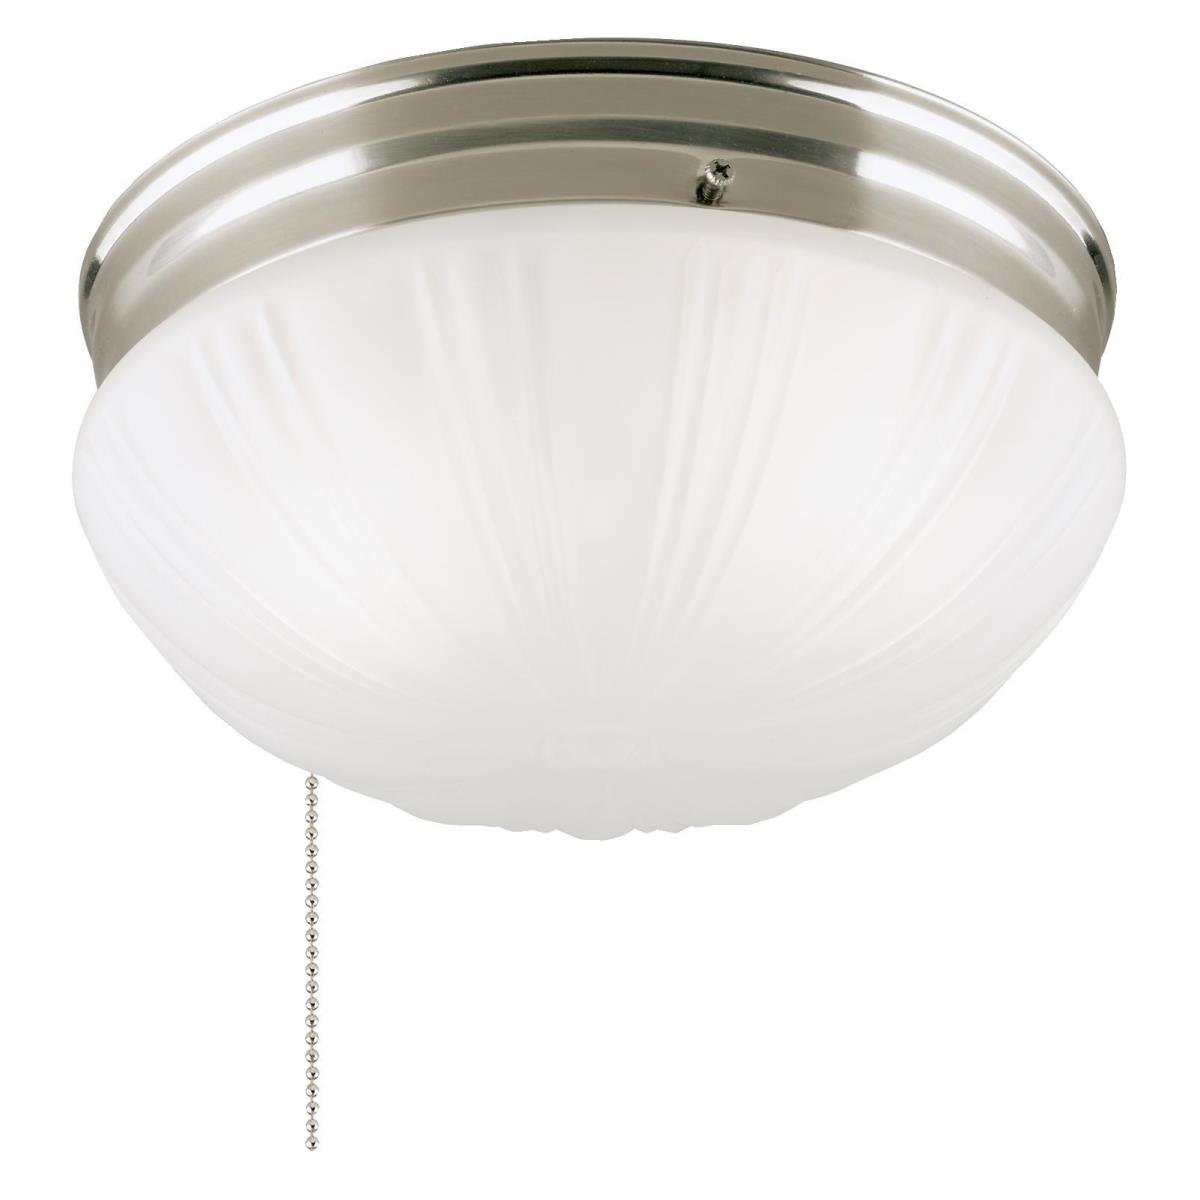 2 Light Flush with Pull Chain Brushed Nickel Finish with Frosted Fluted Glass